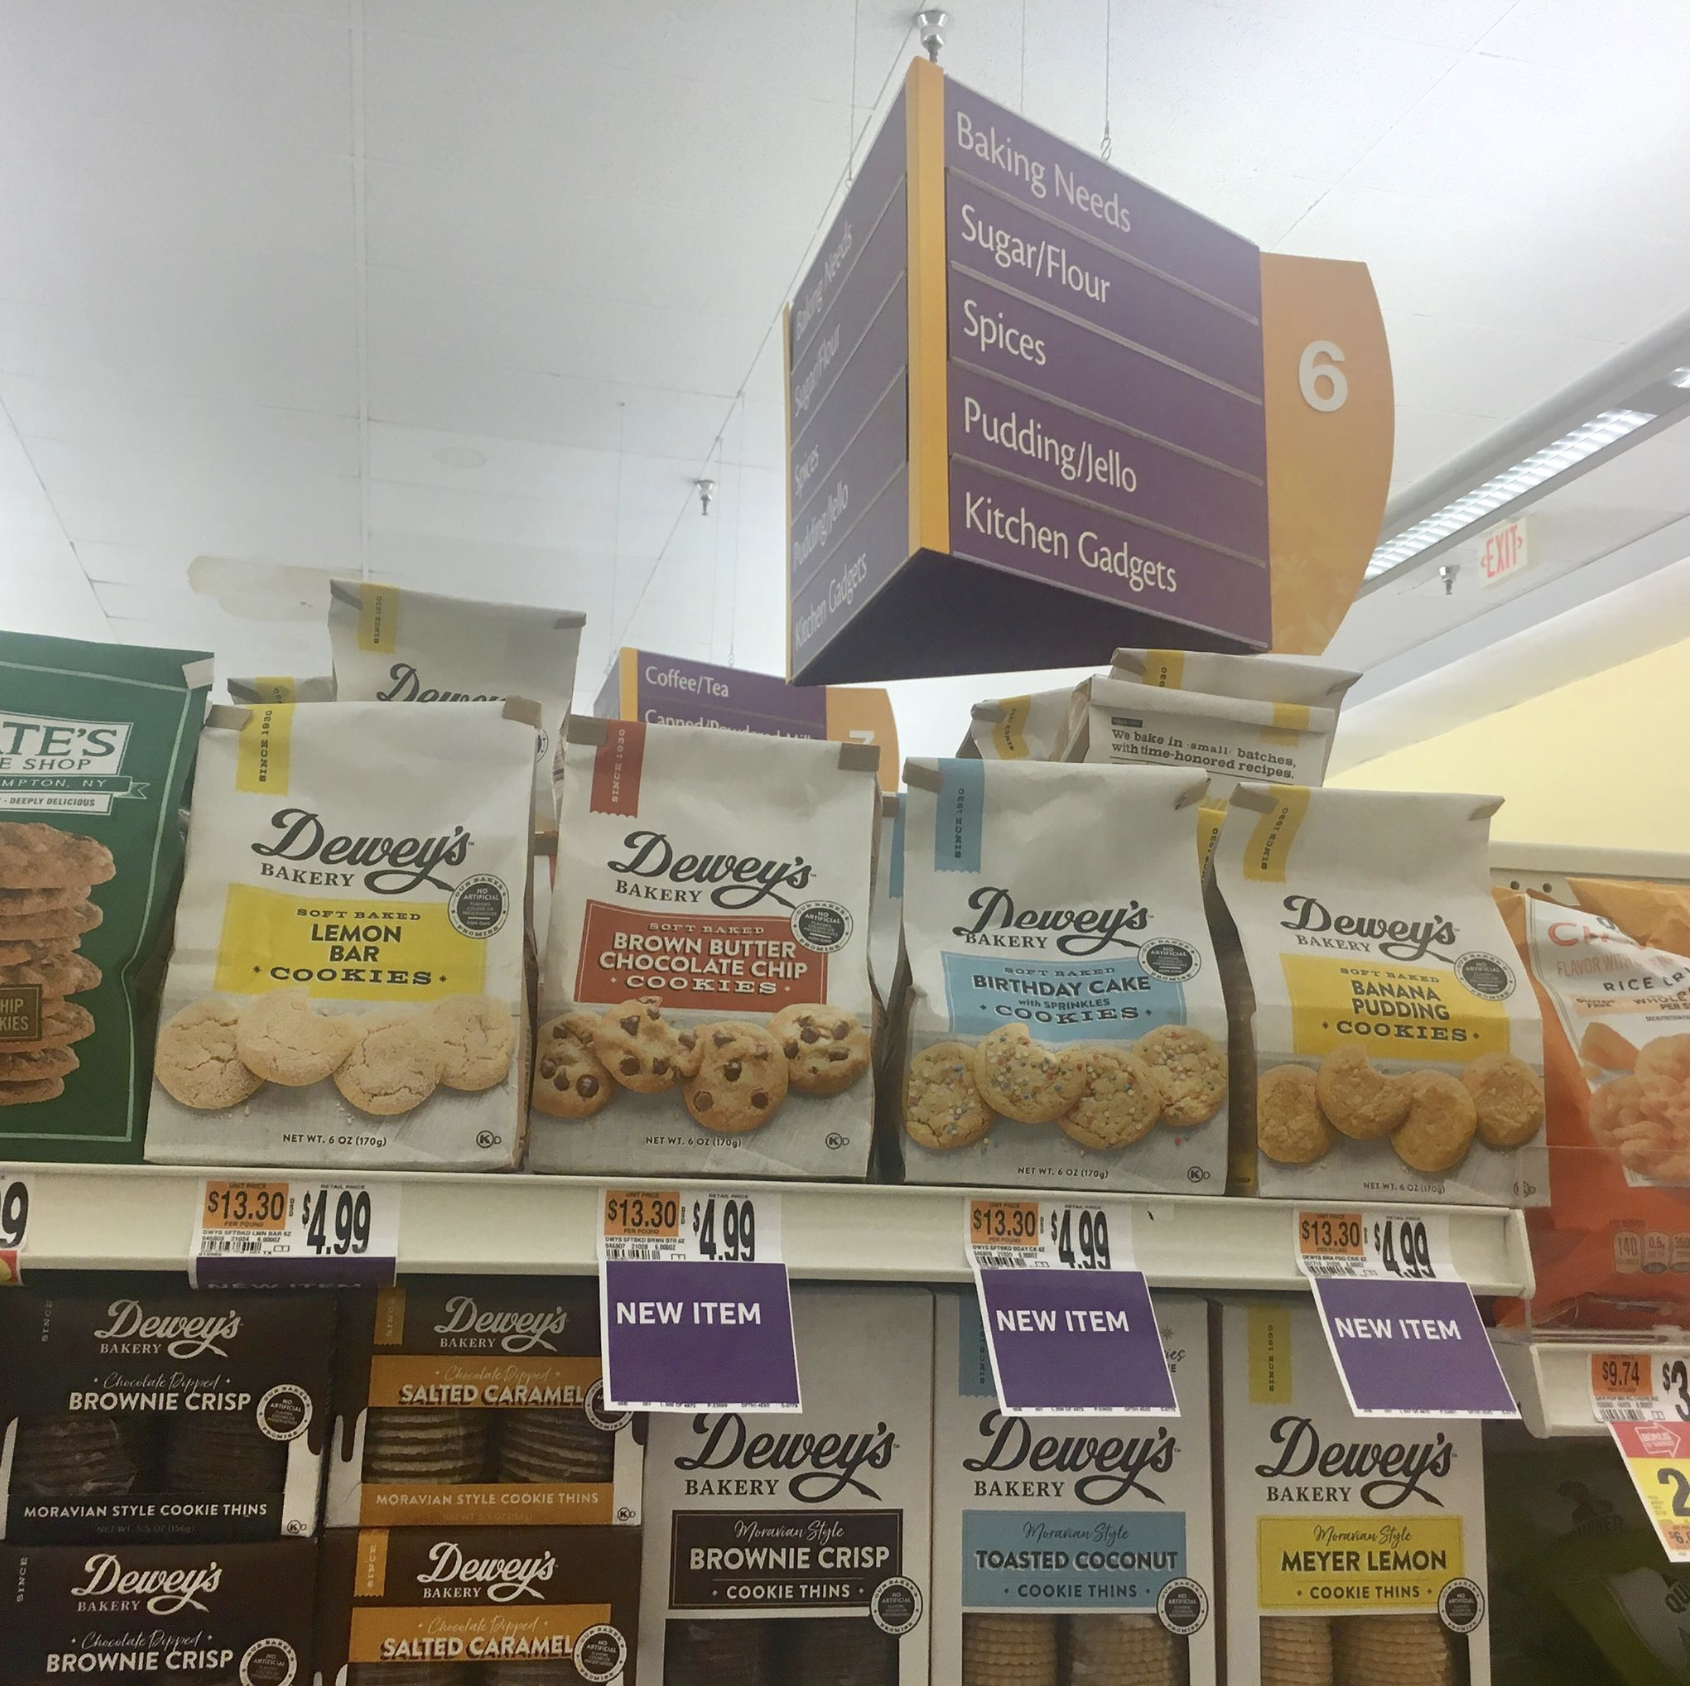 Dewey's Bakery Soft Baked Cookies available at Walmart, Wegmans and Giant retailers